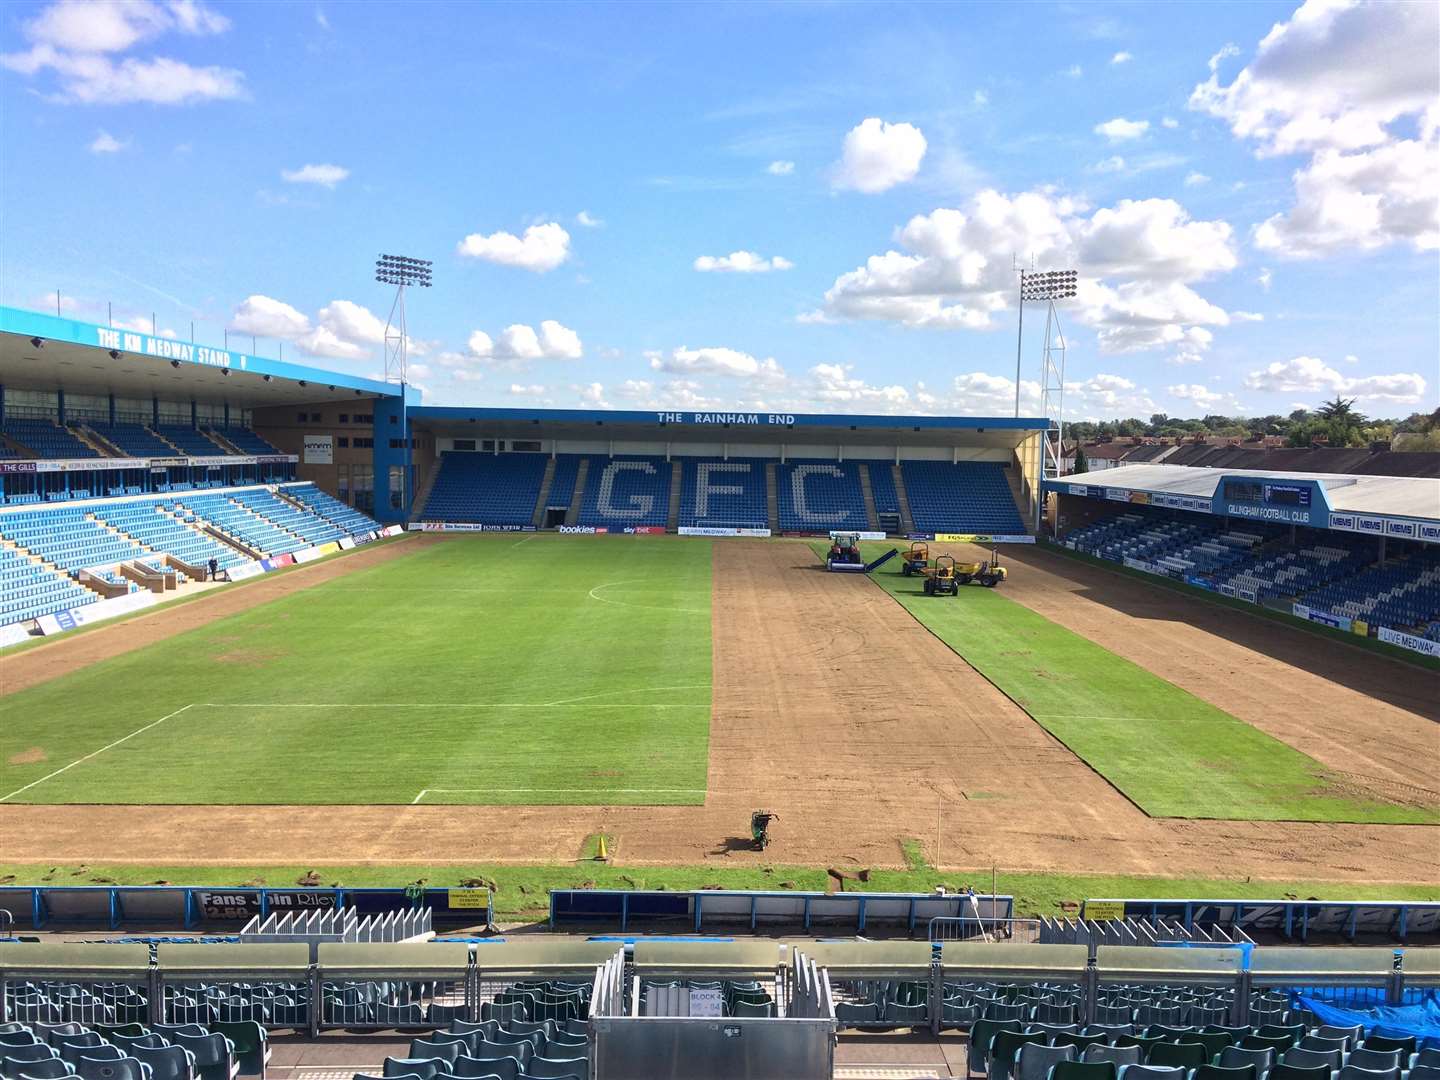 Work takes place at Priestfield on Monday, removing the pitch